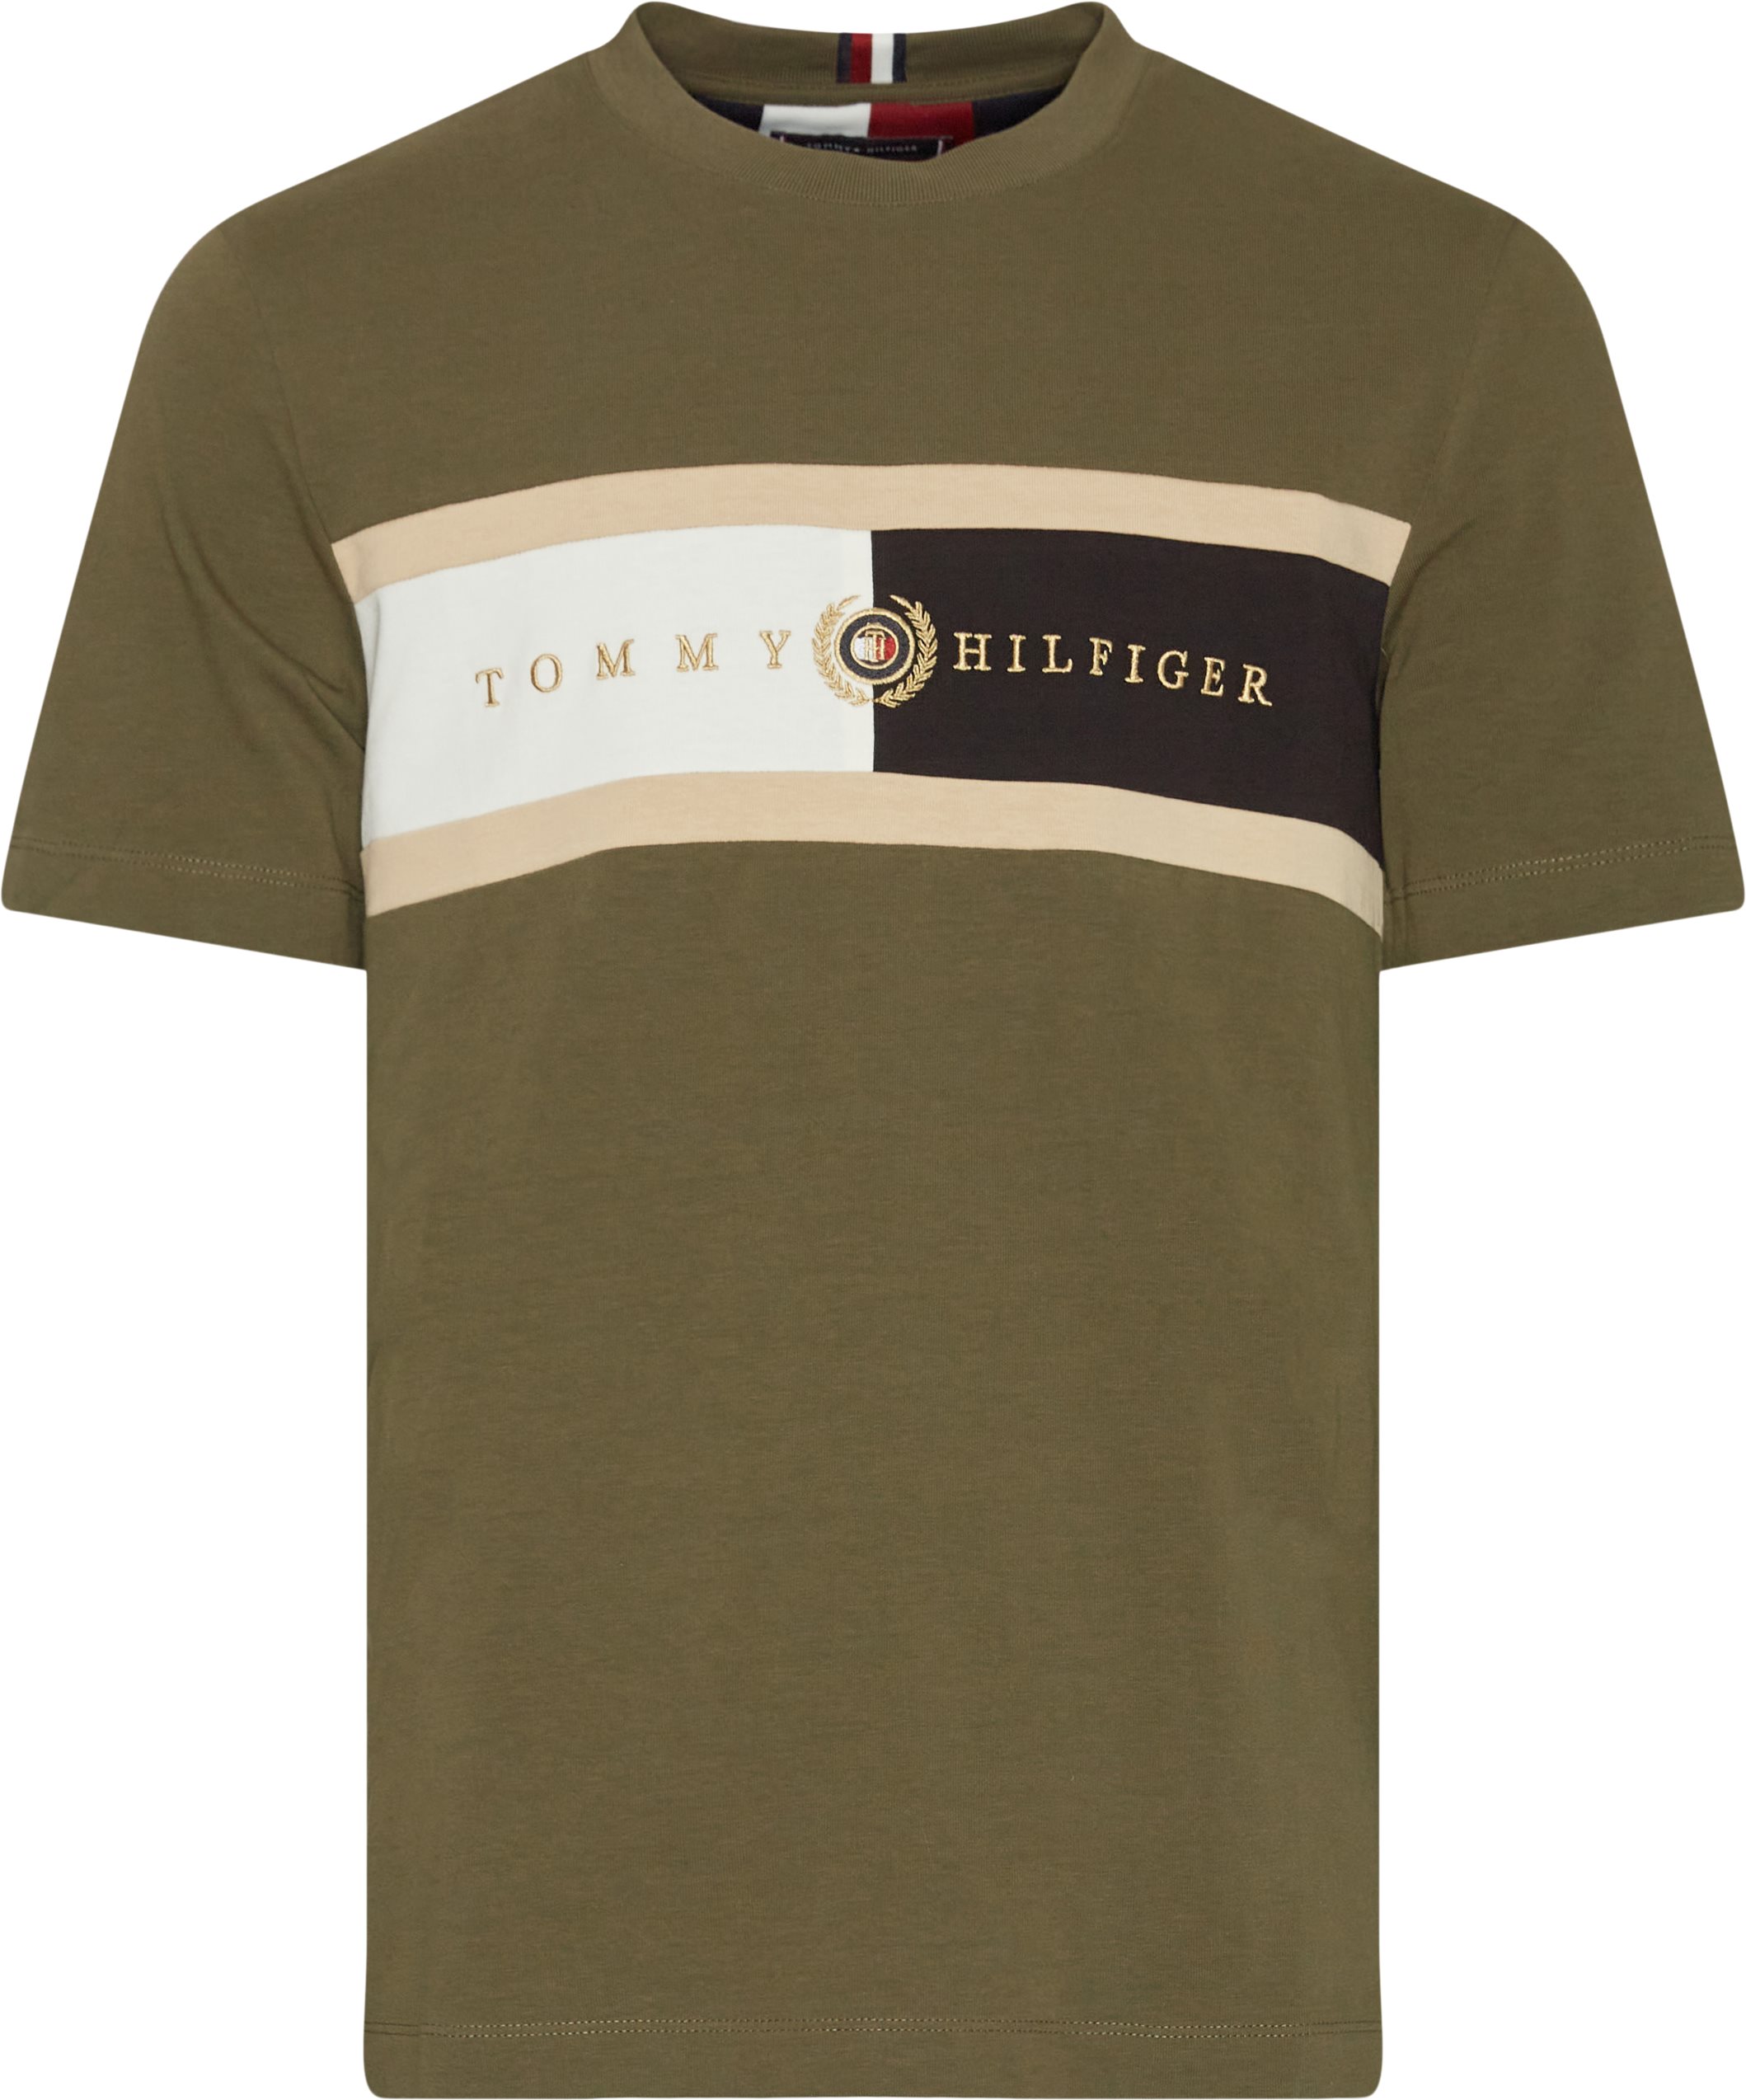 25064 ICON INSERT TEE T-shirts ARMY Tommy Hilfiger 53 EUR